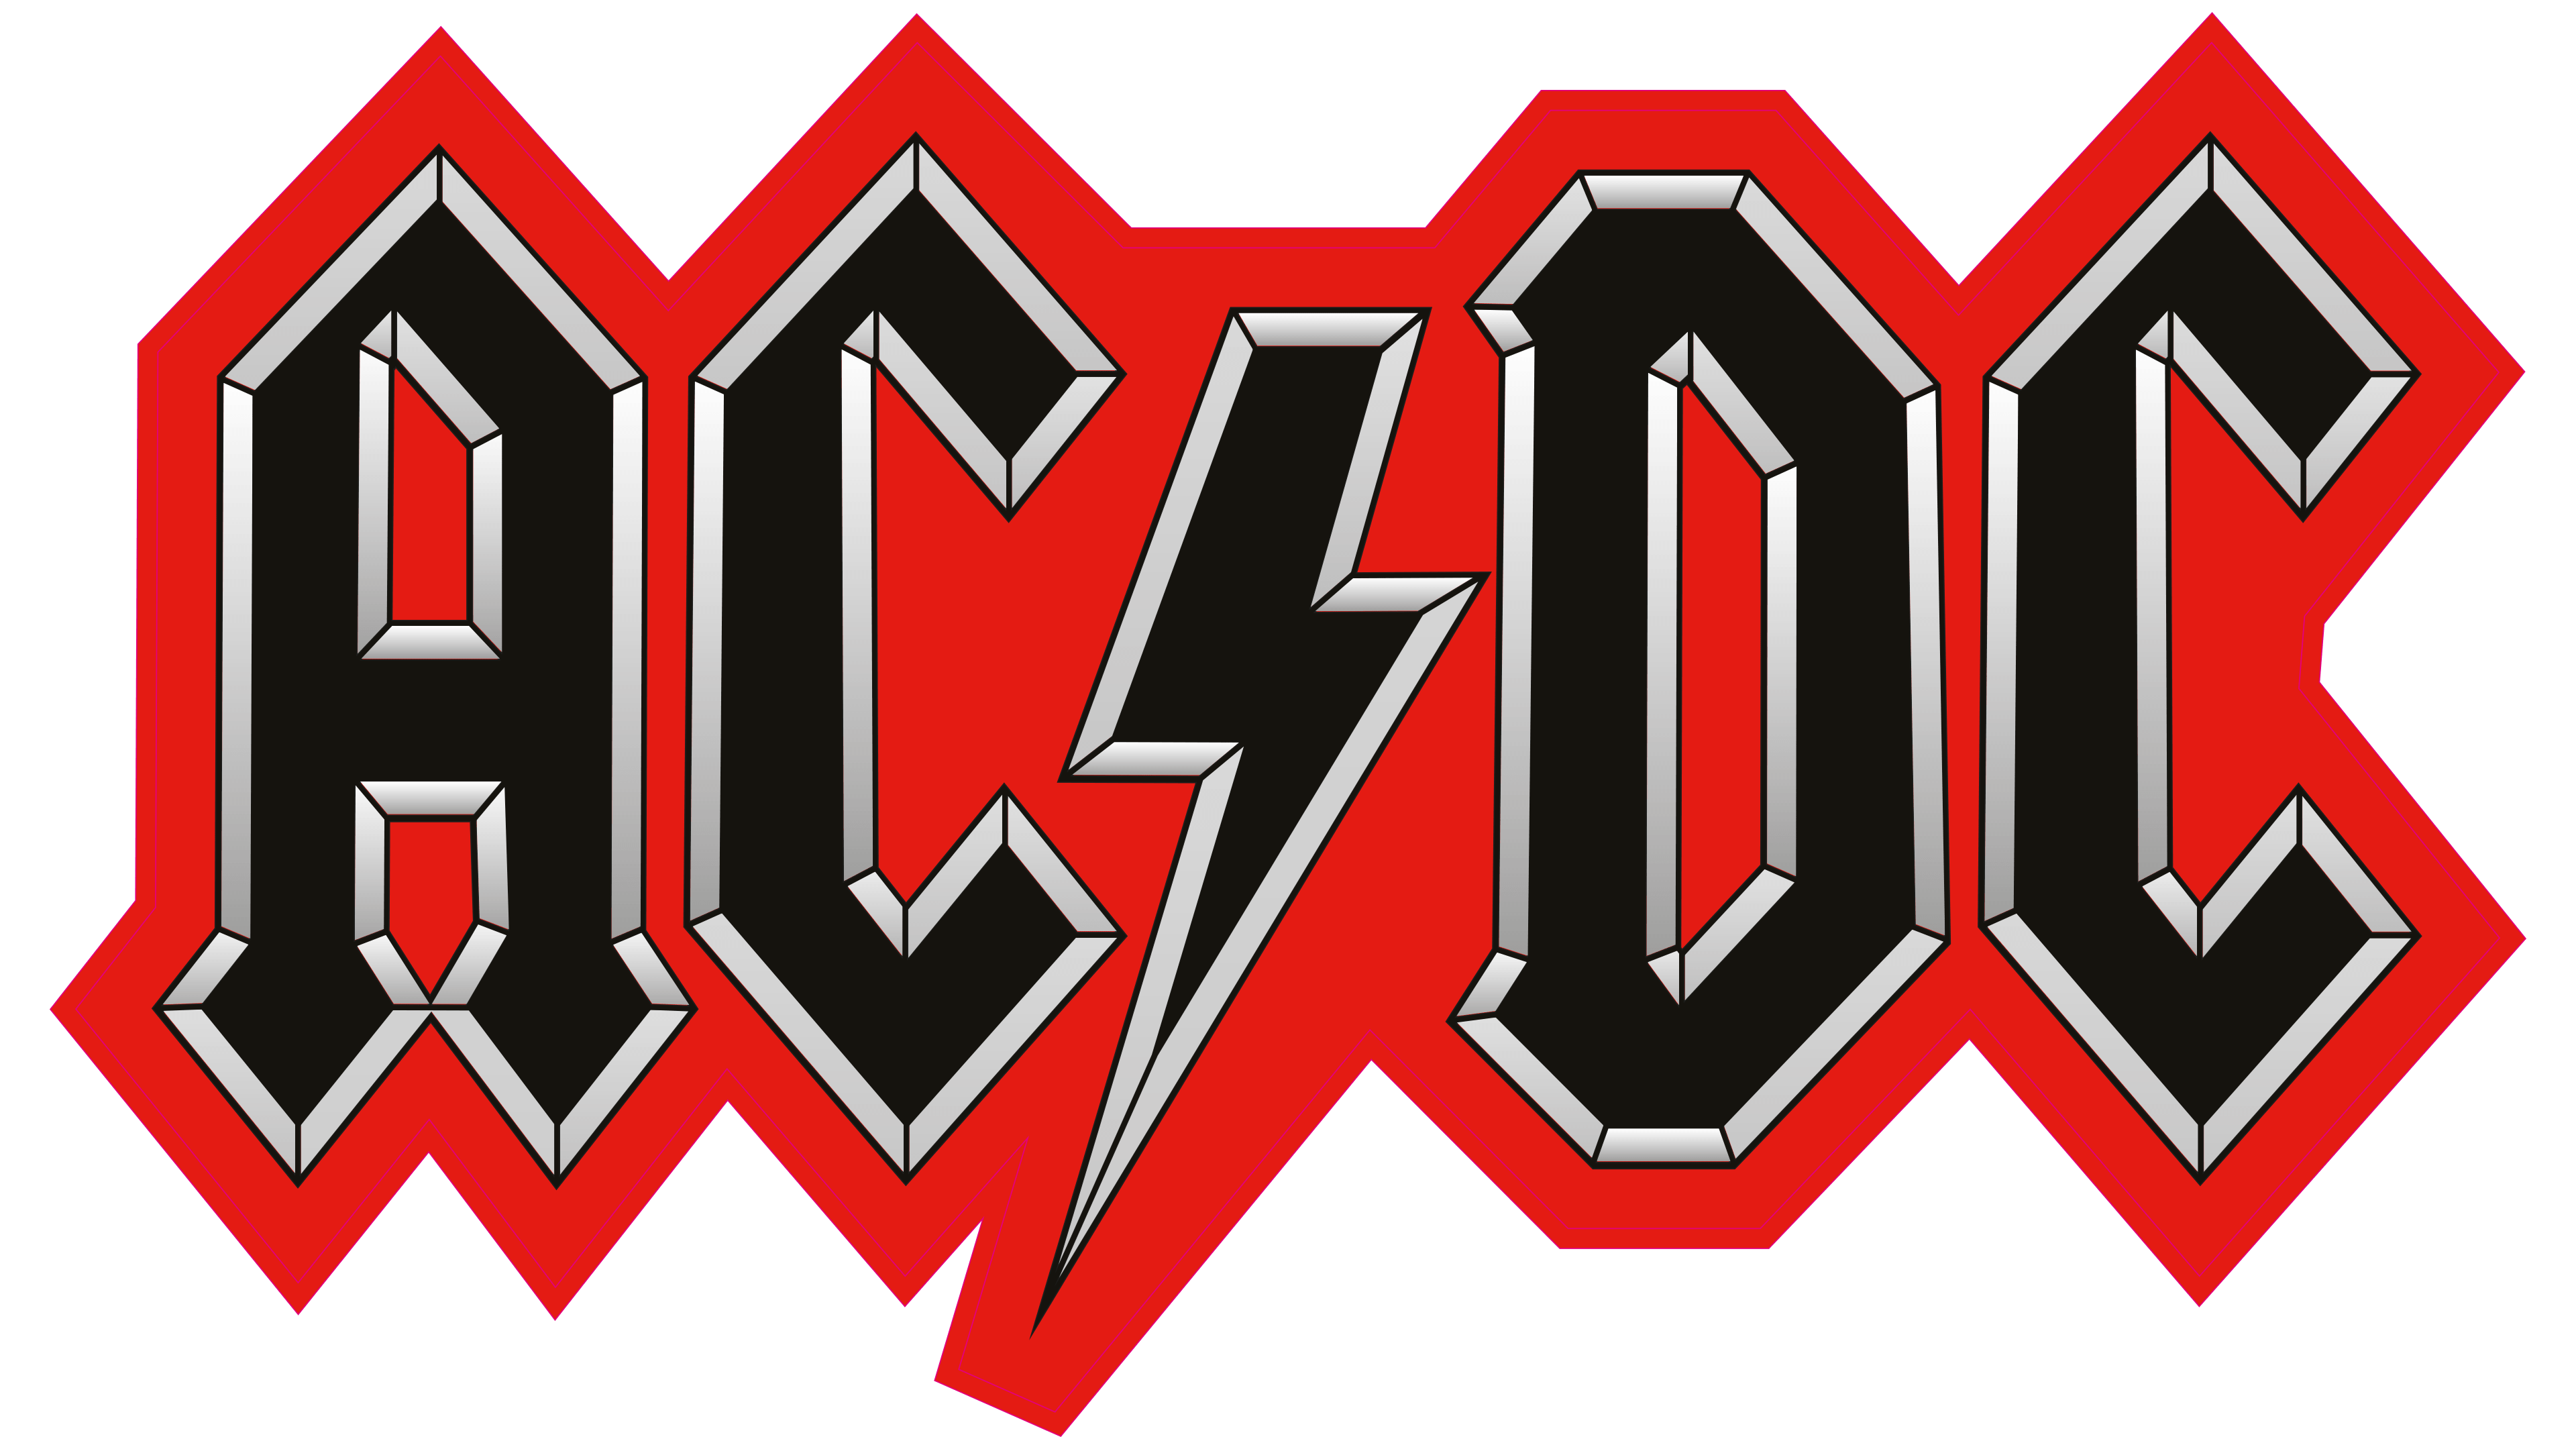 Acdc Logo Ac Dc Png Download 536x304 6928727 Png Imag - vrogue.co